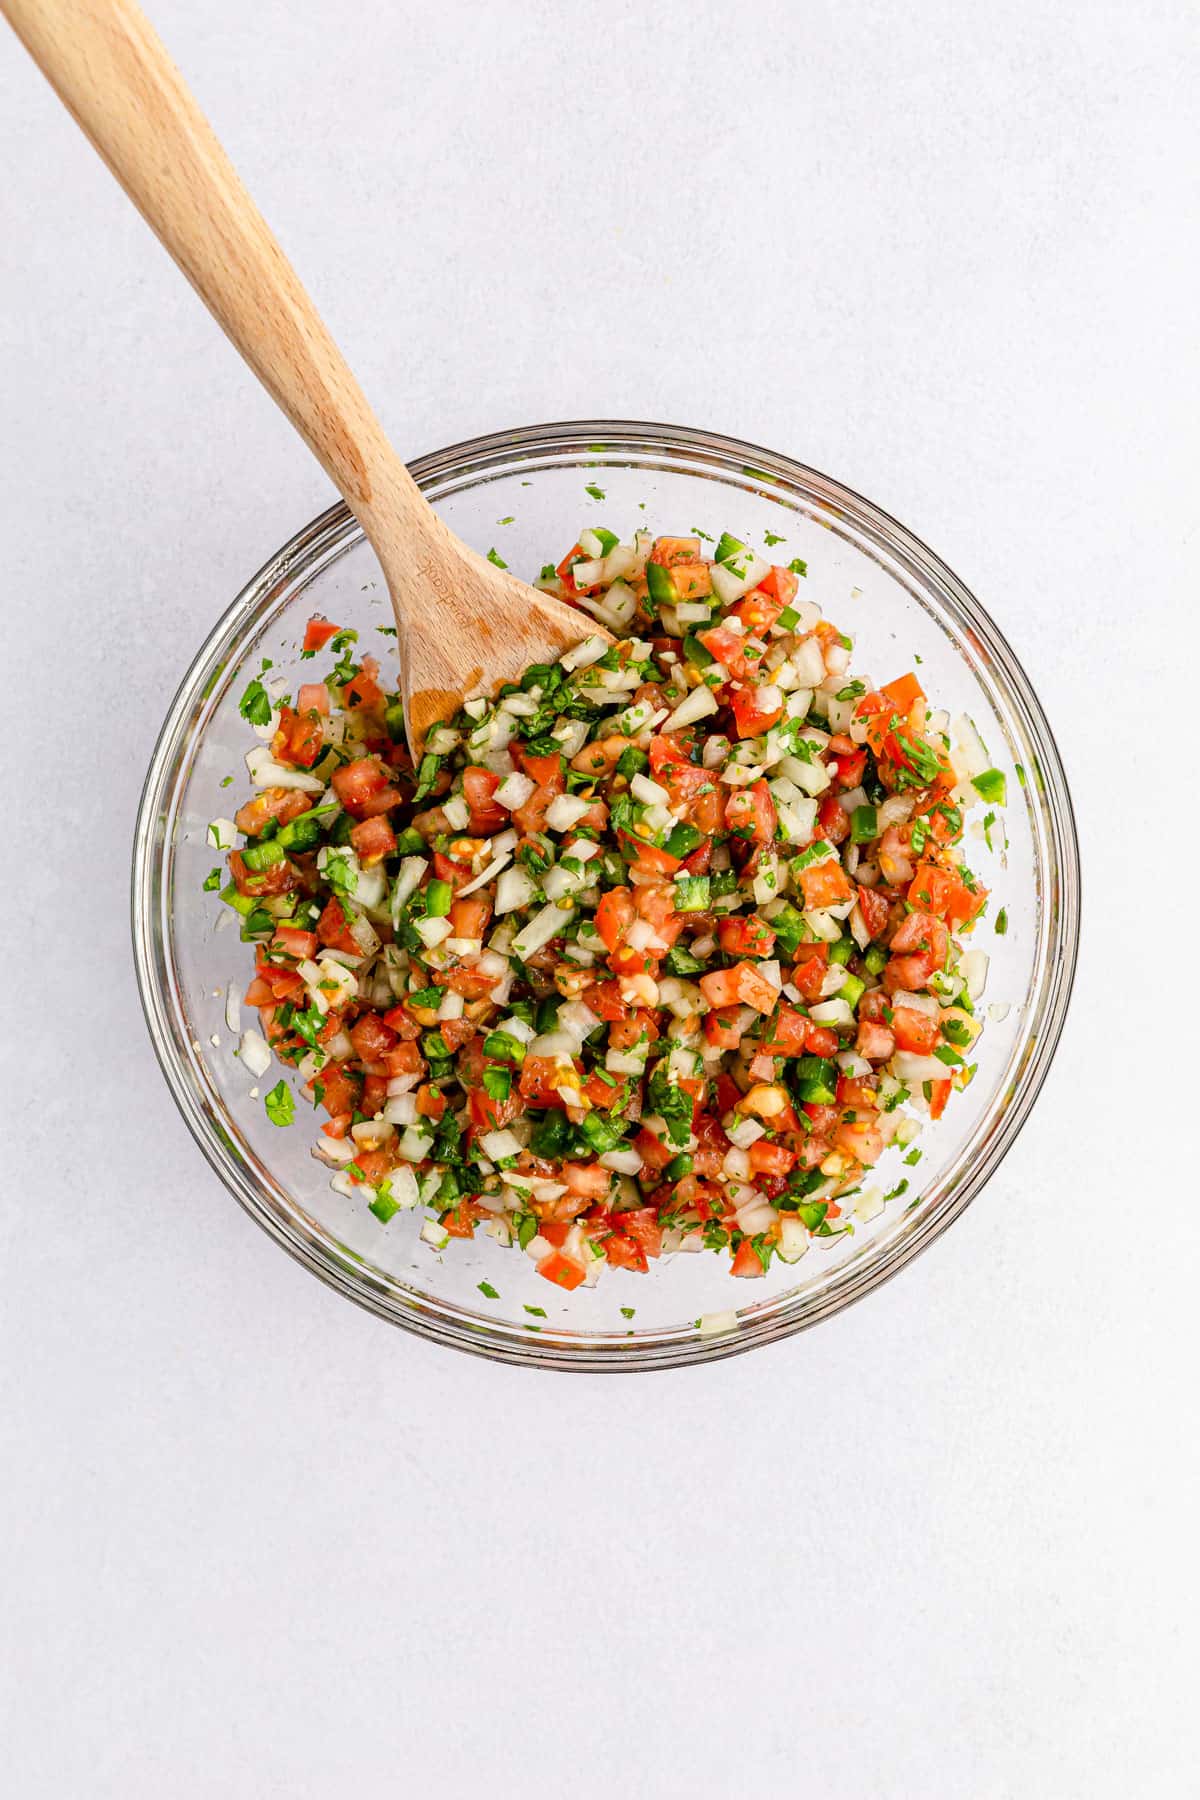 Classing pico de gallo ingredients mixed together in a glass bowl.